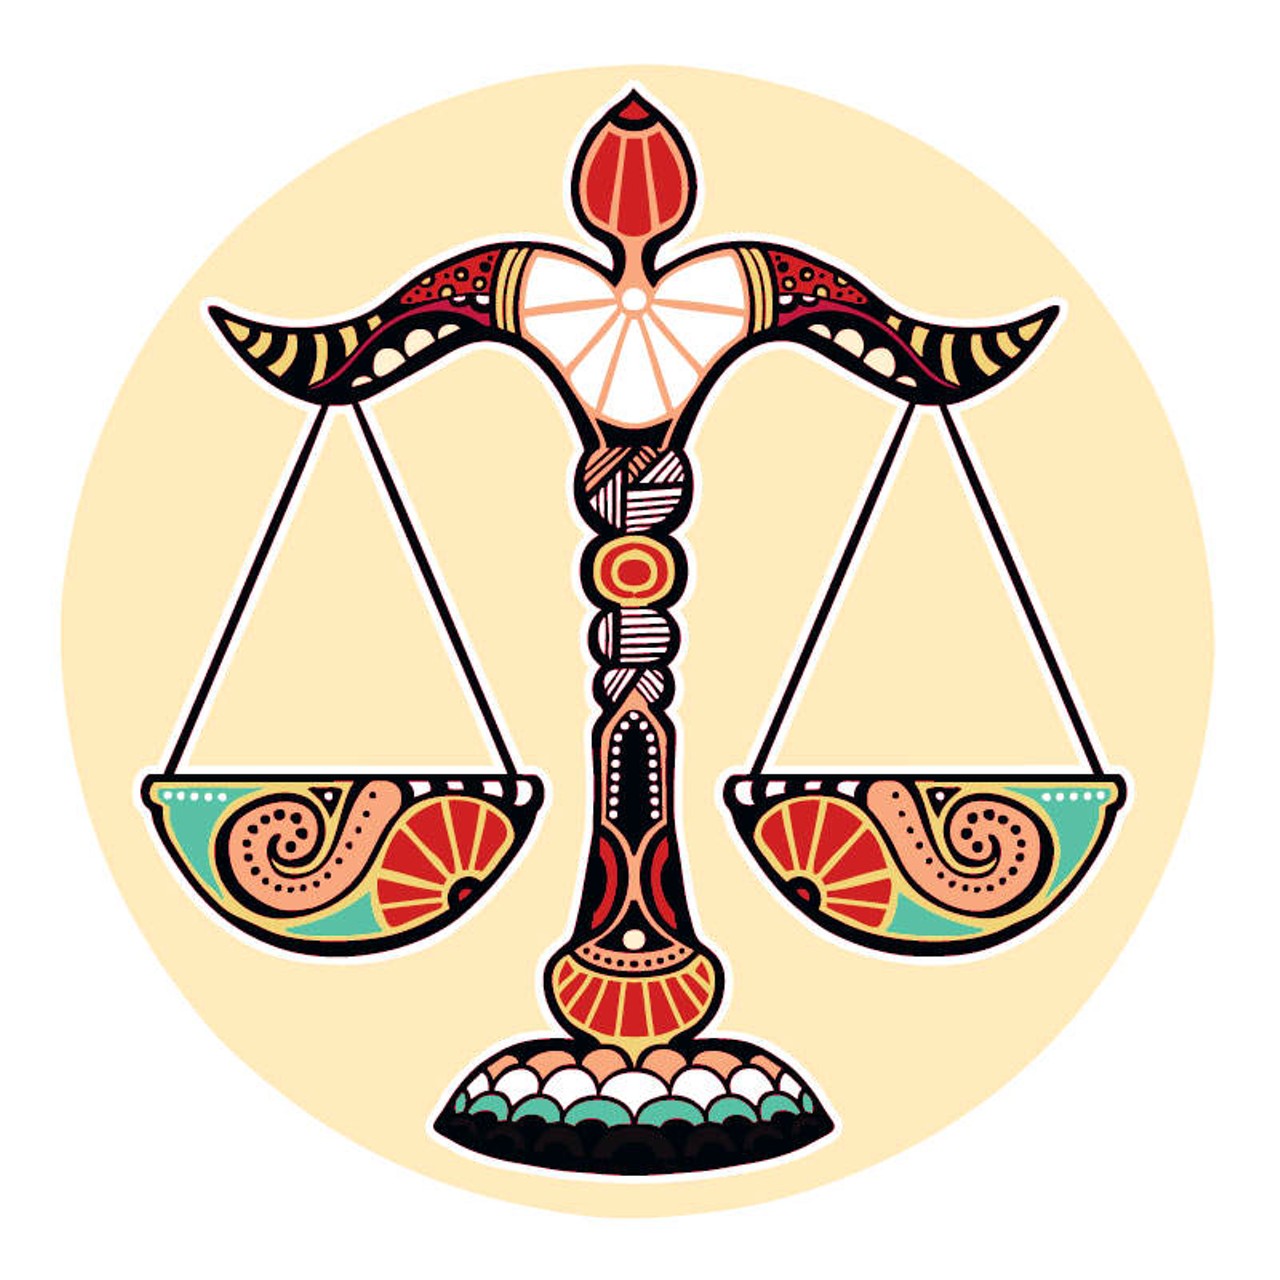 LIBRA (Sept. 21-Oct. 20):
Smooth sailing is what this is called. Even if you're working your butt off, you haven't felt this good in a long time. Get used to it because everything's about to get better. In a few weeks the potential for beneficial surprises will be on a huge roll. Others are there for you &#151; in more ways than one. No need to get weird about asking for help. Don't be shy when it comes time to get out there and mingle. Being in the right place at the right time means everything right now. As your boundaries stretch, be sure to keep your ability to celebrate diversity, on every level, wide open.